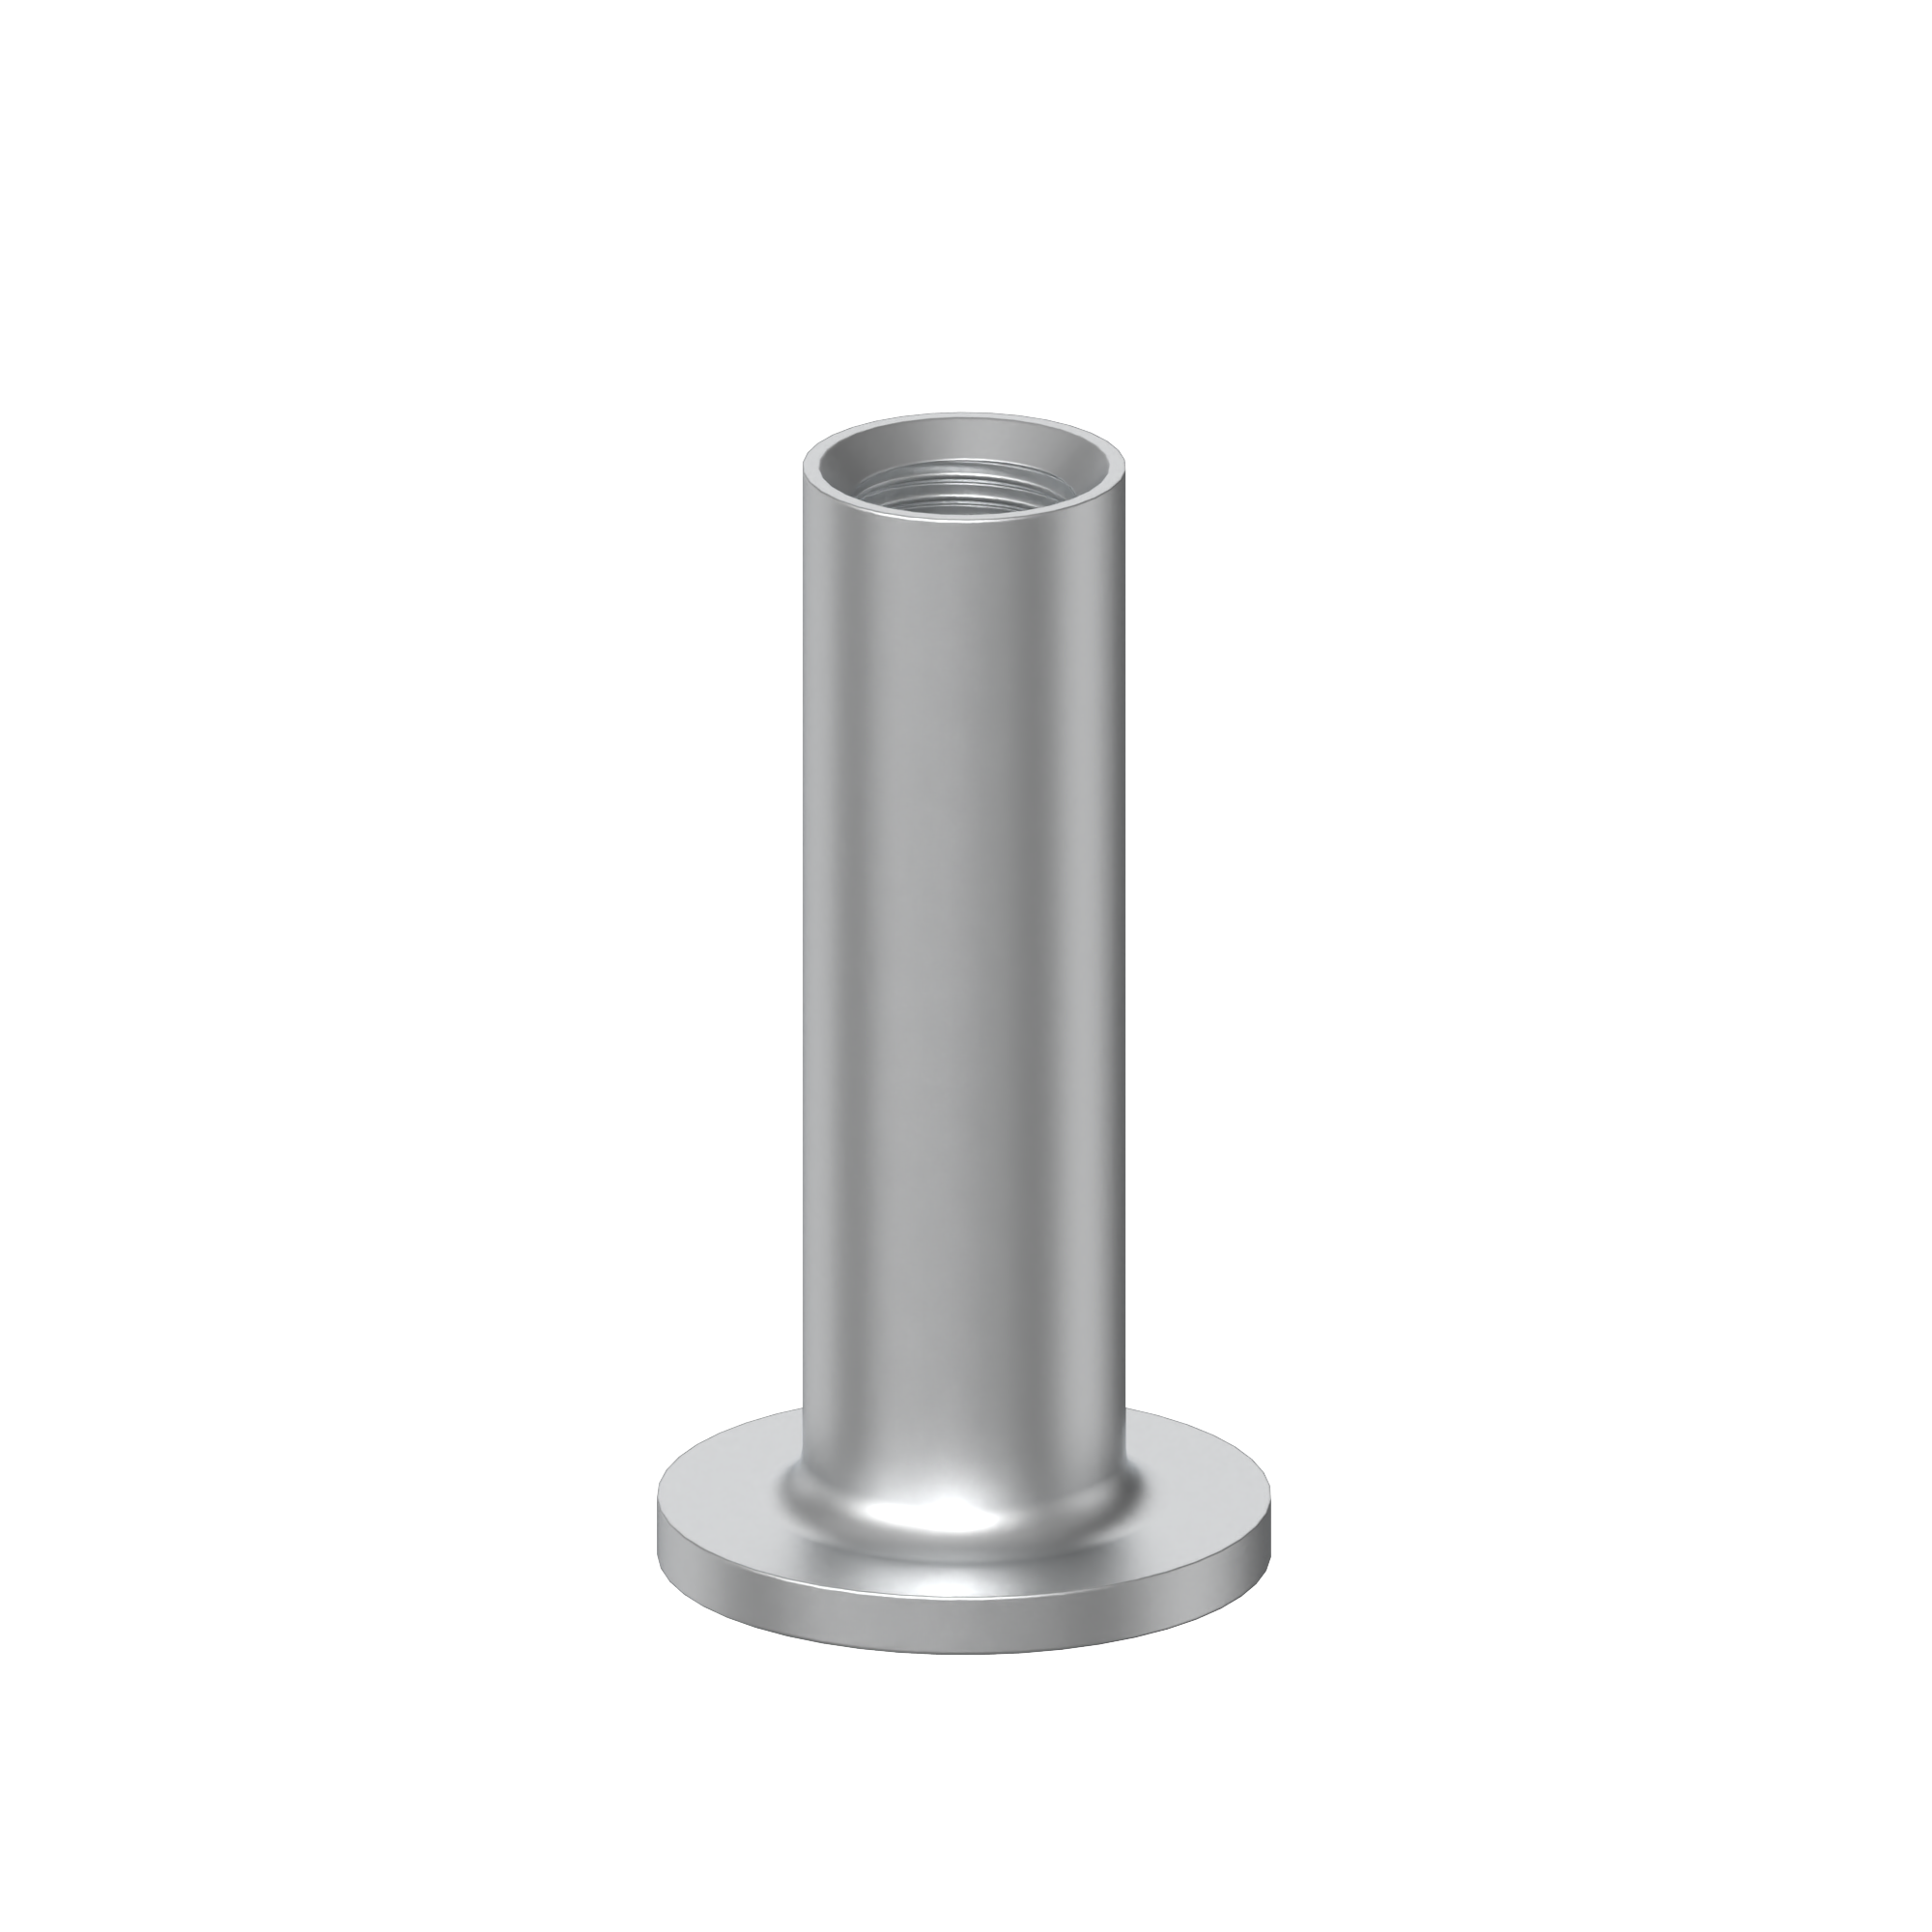 Stud anchor with end plate A4 real render